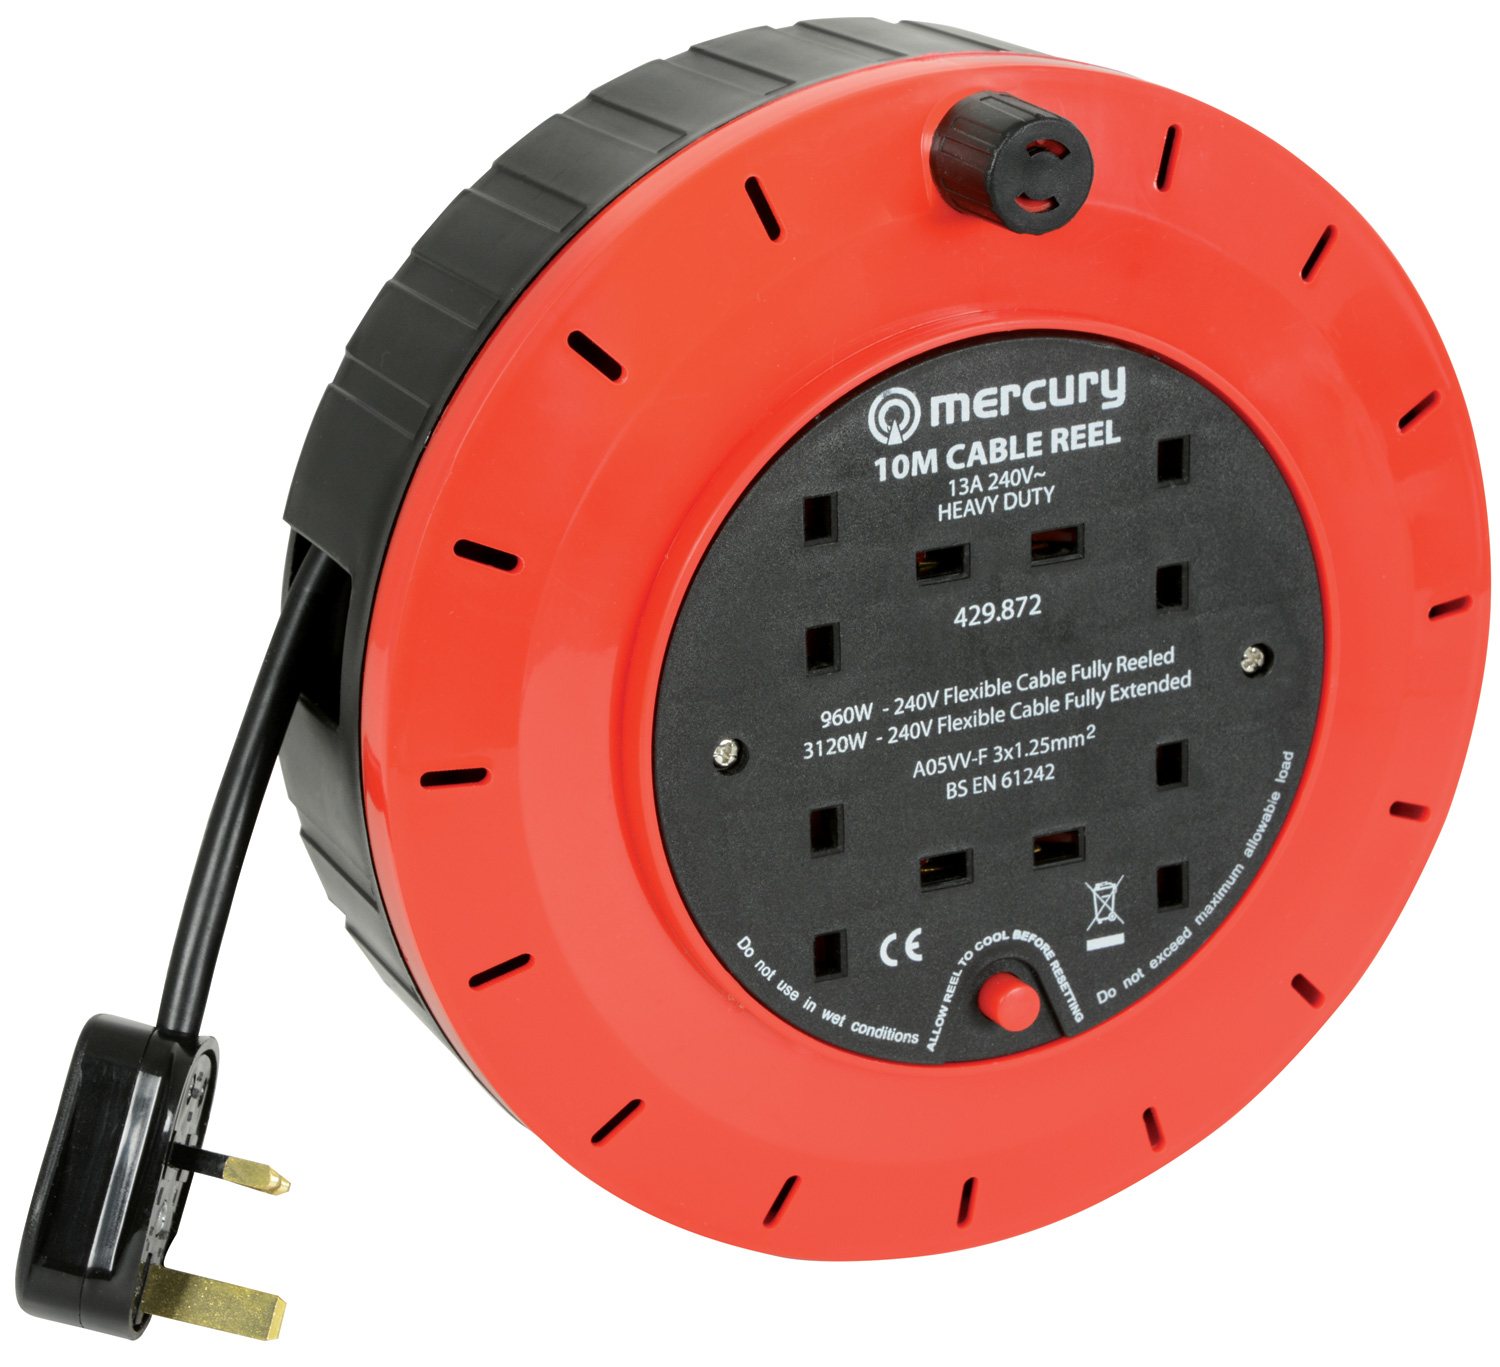 CRAFTSMAN Heavy Cable Management Reel, 1 Ft Cord with 4 Outlets- 14awg Sjtw  Cable- Outdoor Power Cord Reel in the Extension Cord Accessories department  at